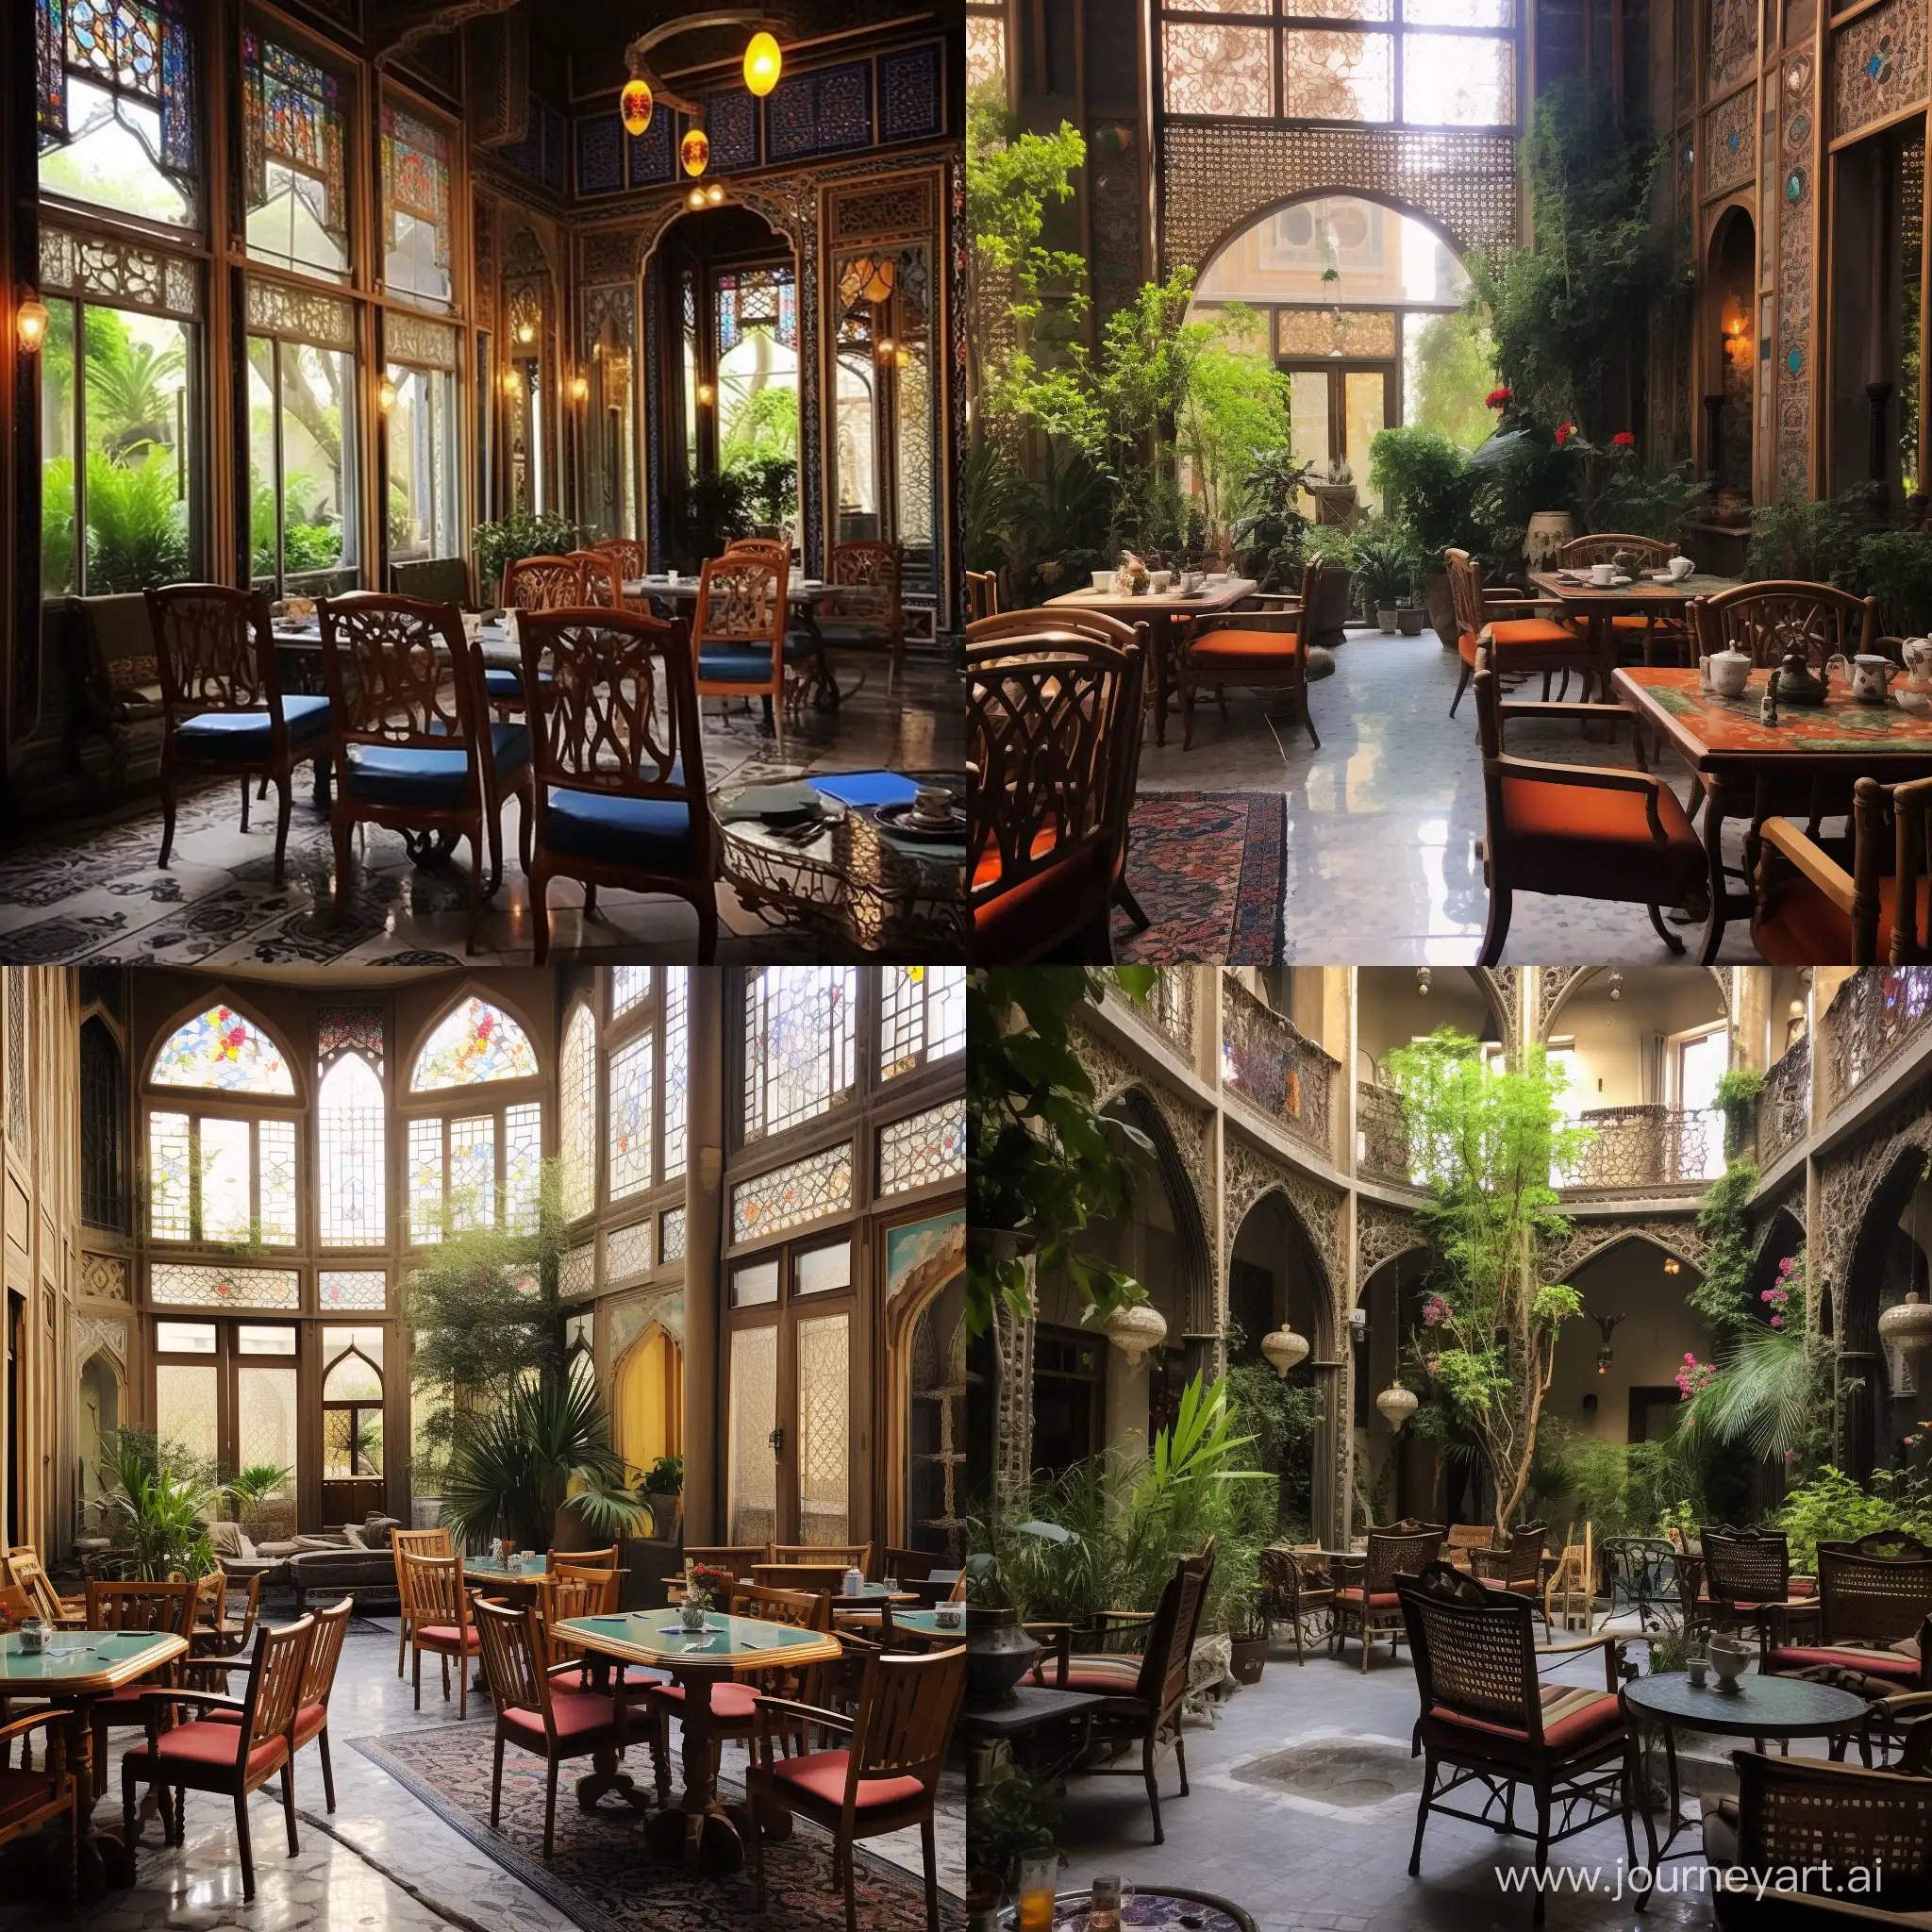 Zaferan Cafe, with Qajar-era architecture, is located in Mashhad. The cafe features a beautiful central courtyard and surrounding seating area. The chairs arranged in the central courtyard, with their old and beautiful decorations, allow customers to enjoy the pleasant outdoor space of the cafe. The walls of the cafe are adorned with old designs and beautiful patterns that give customers a sense of solidity and antiquity.